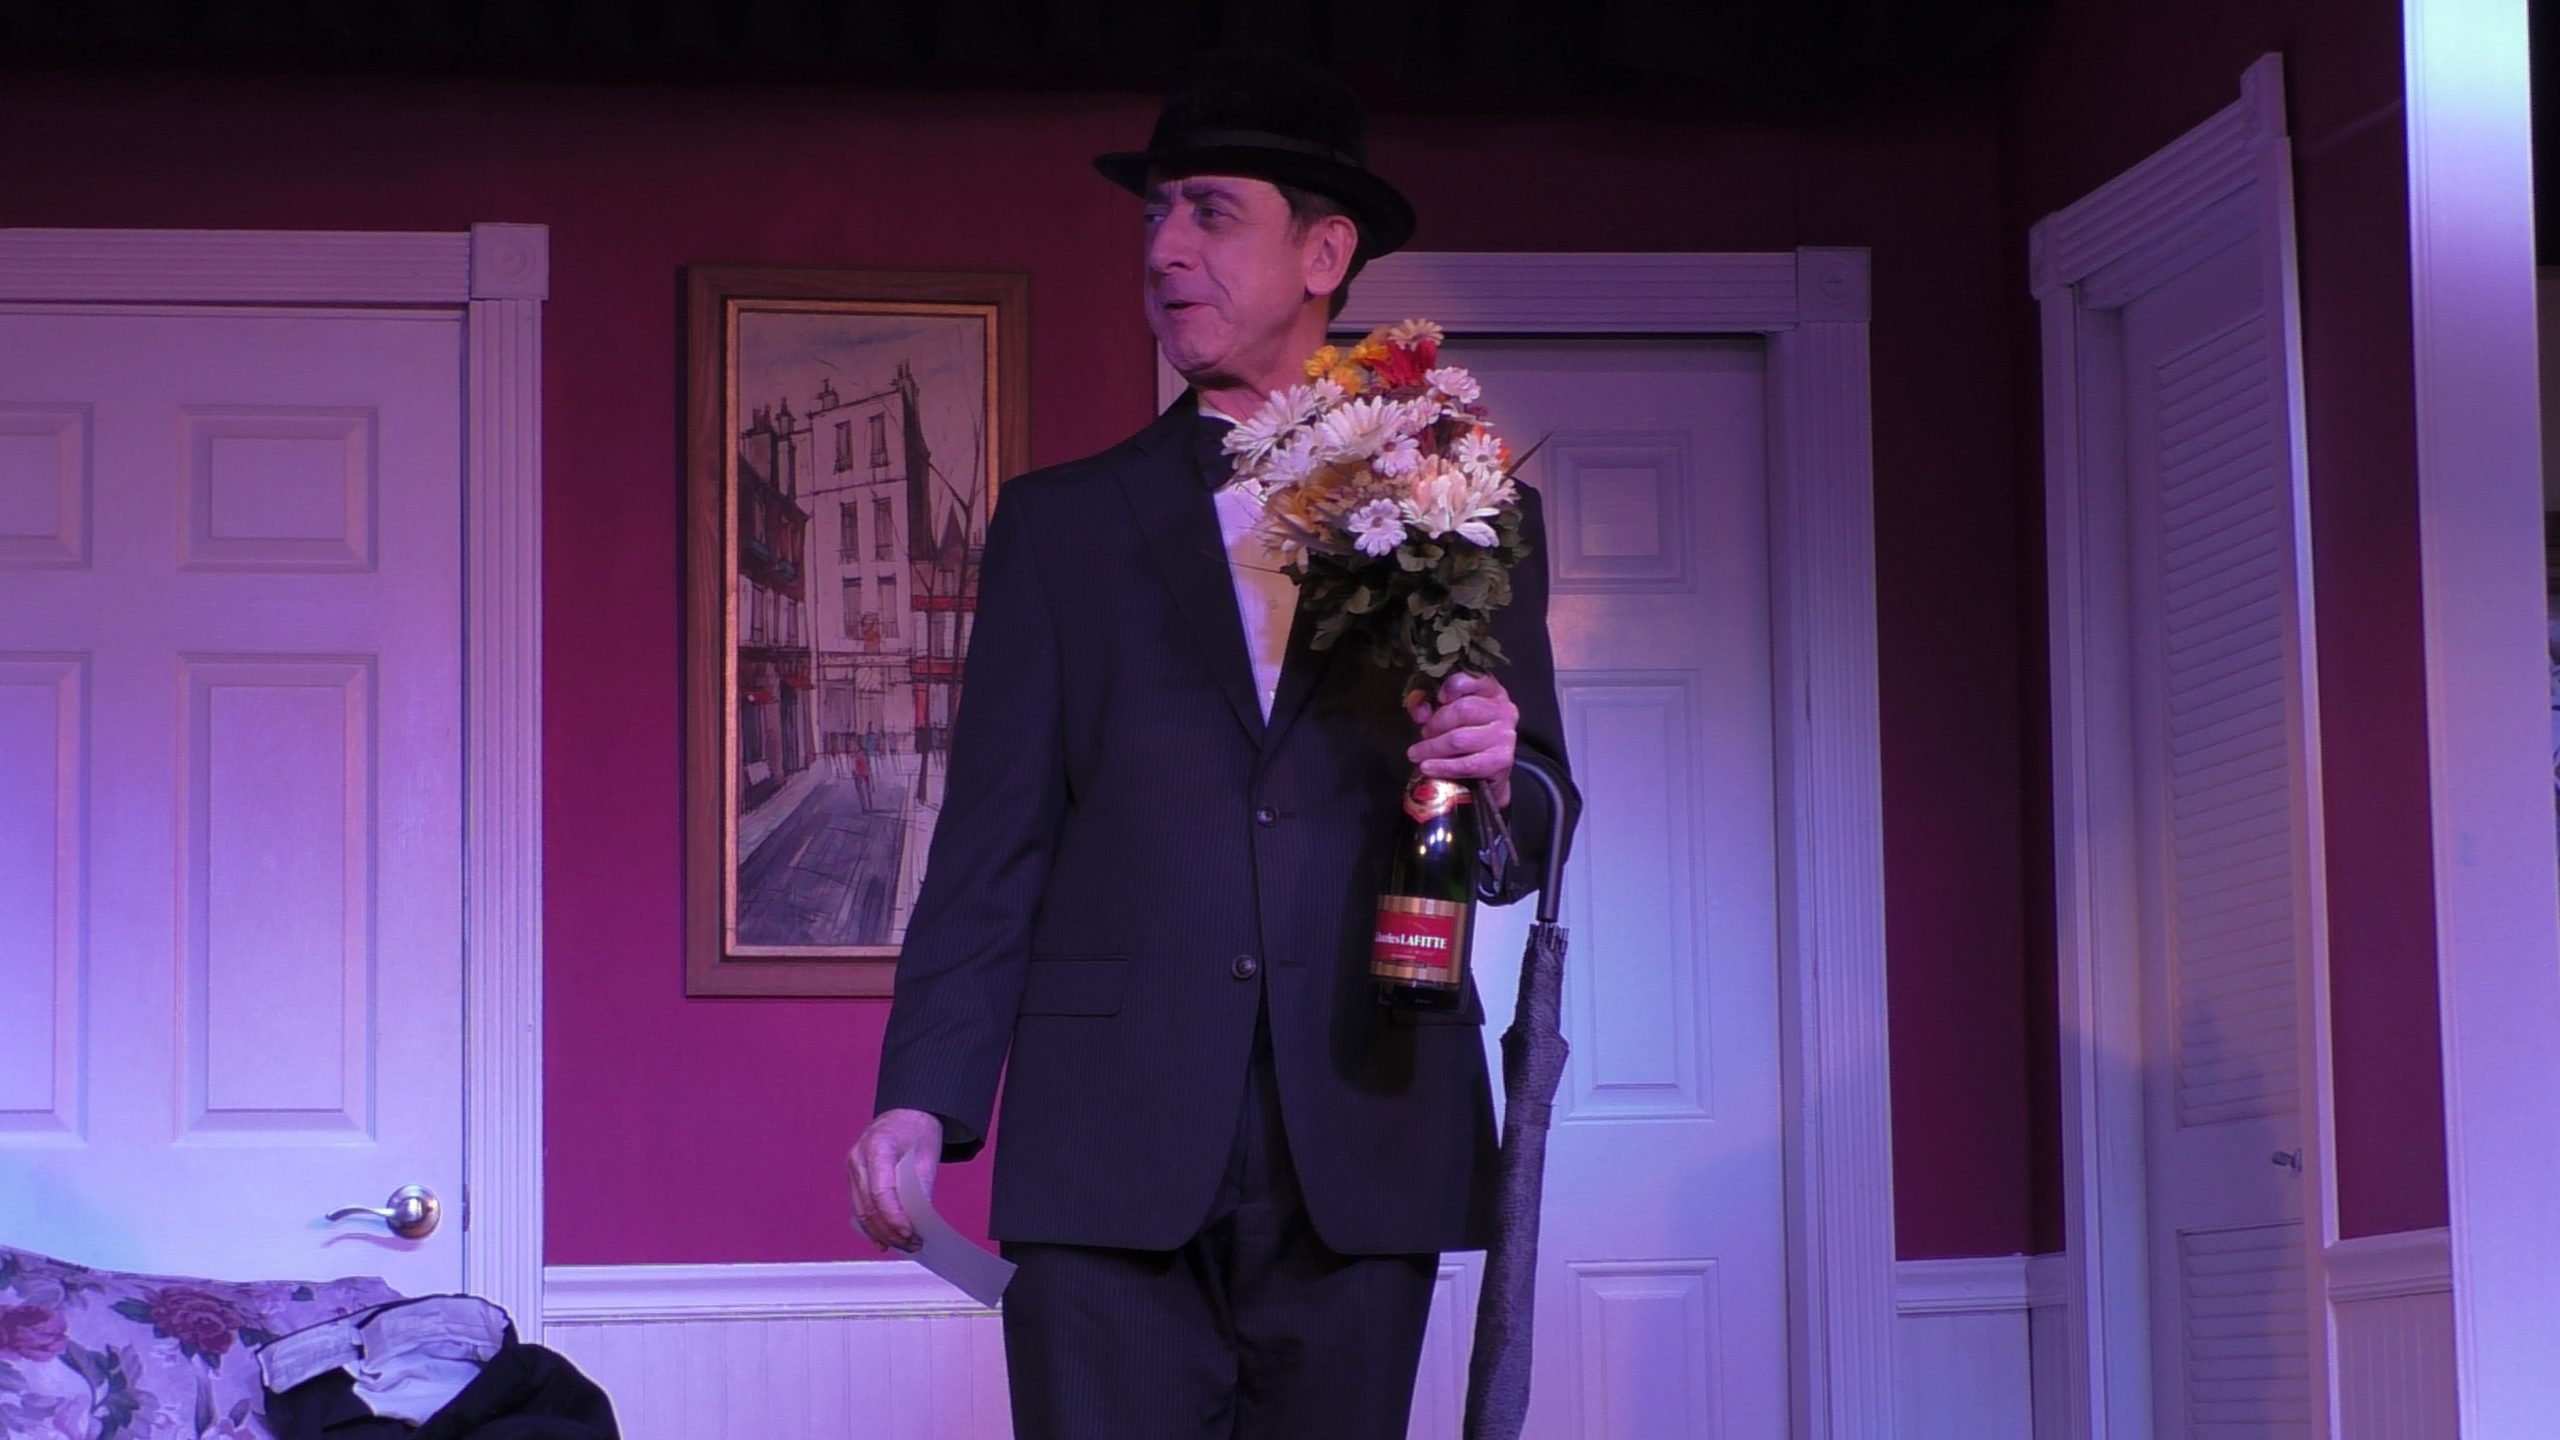 A male actor dressed in a suit and hat holds flowers and a bottle of champagne